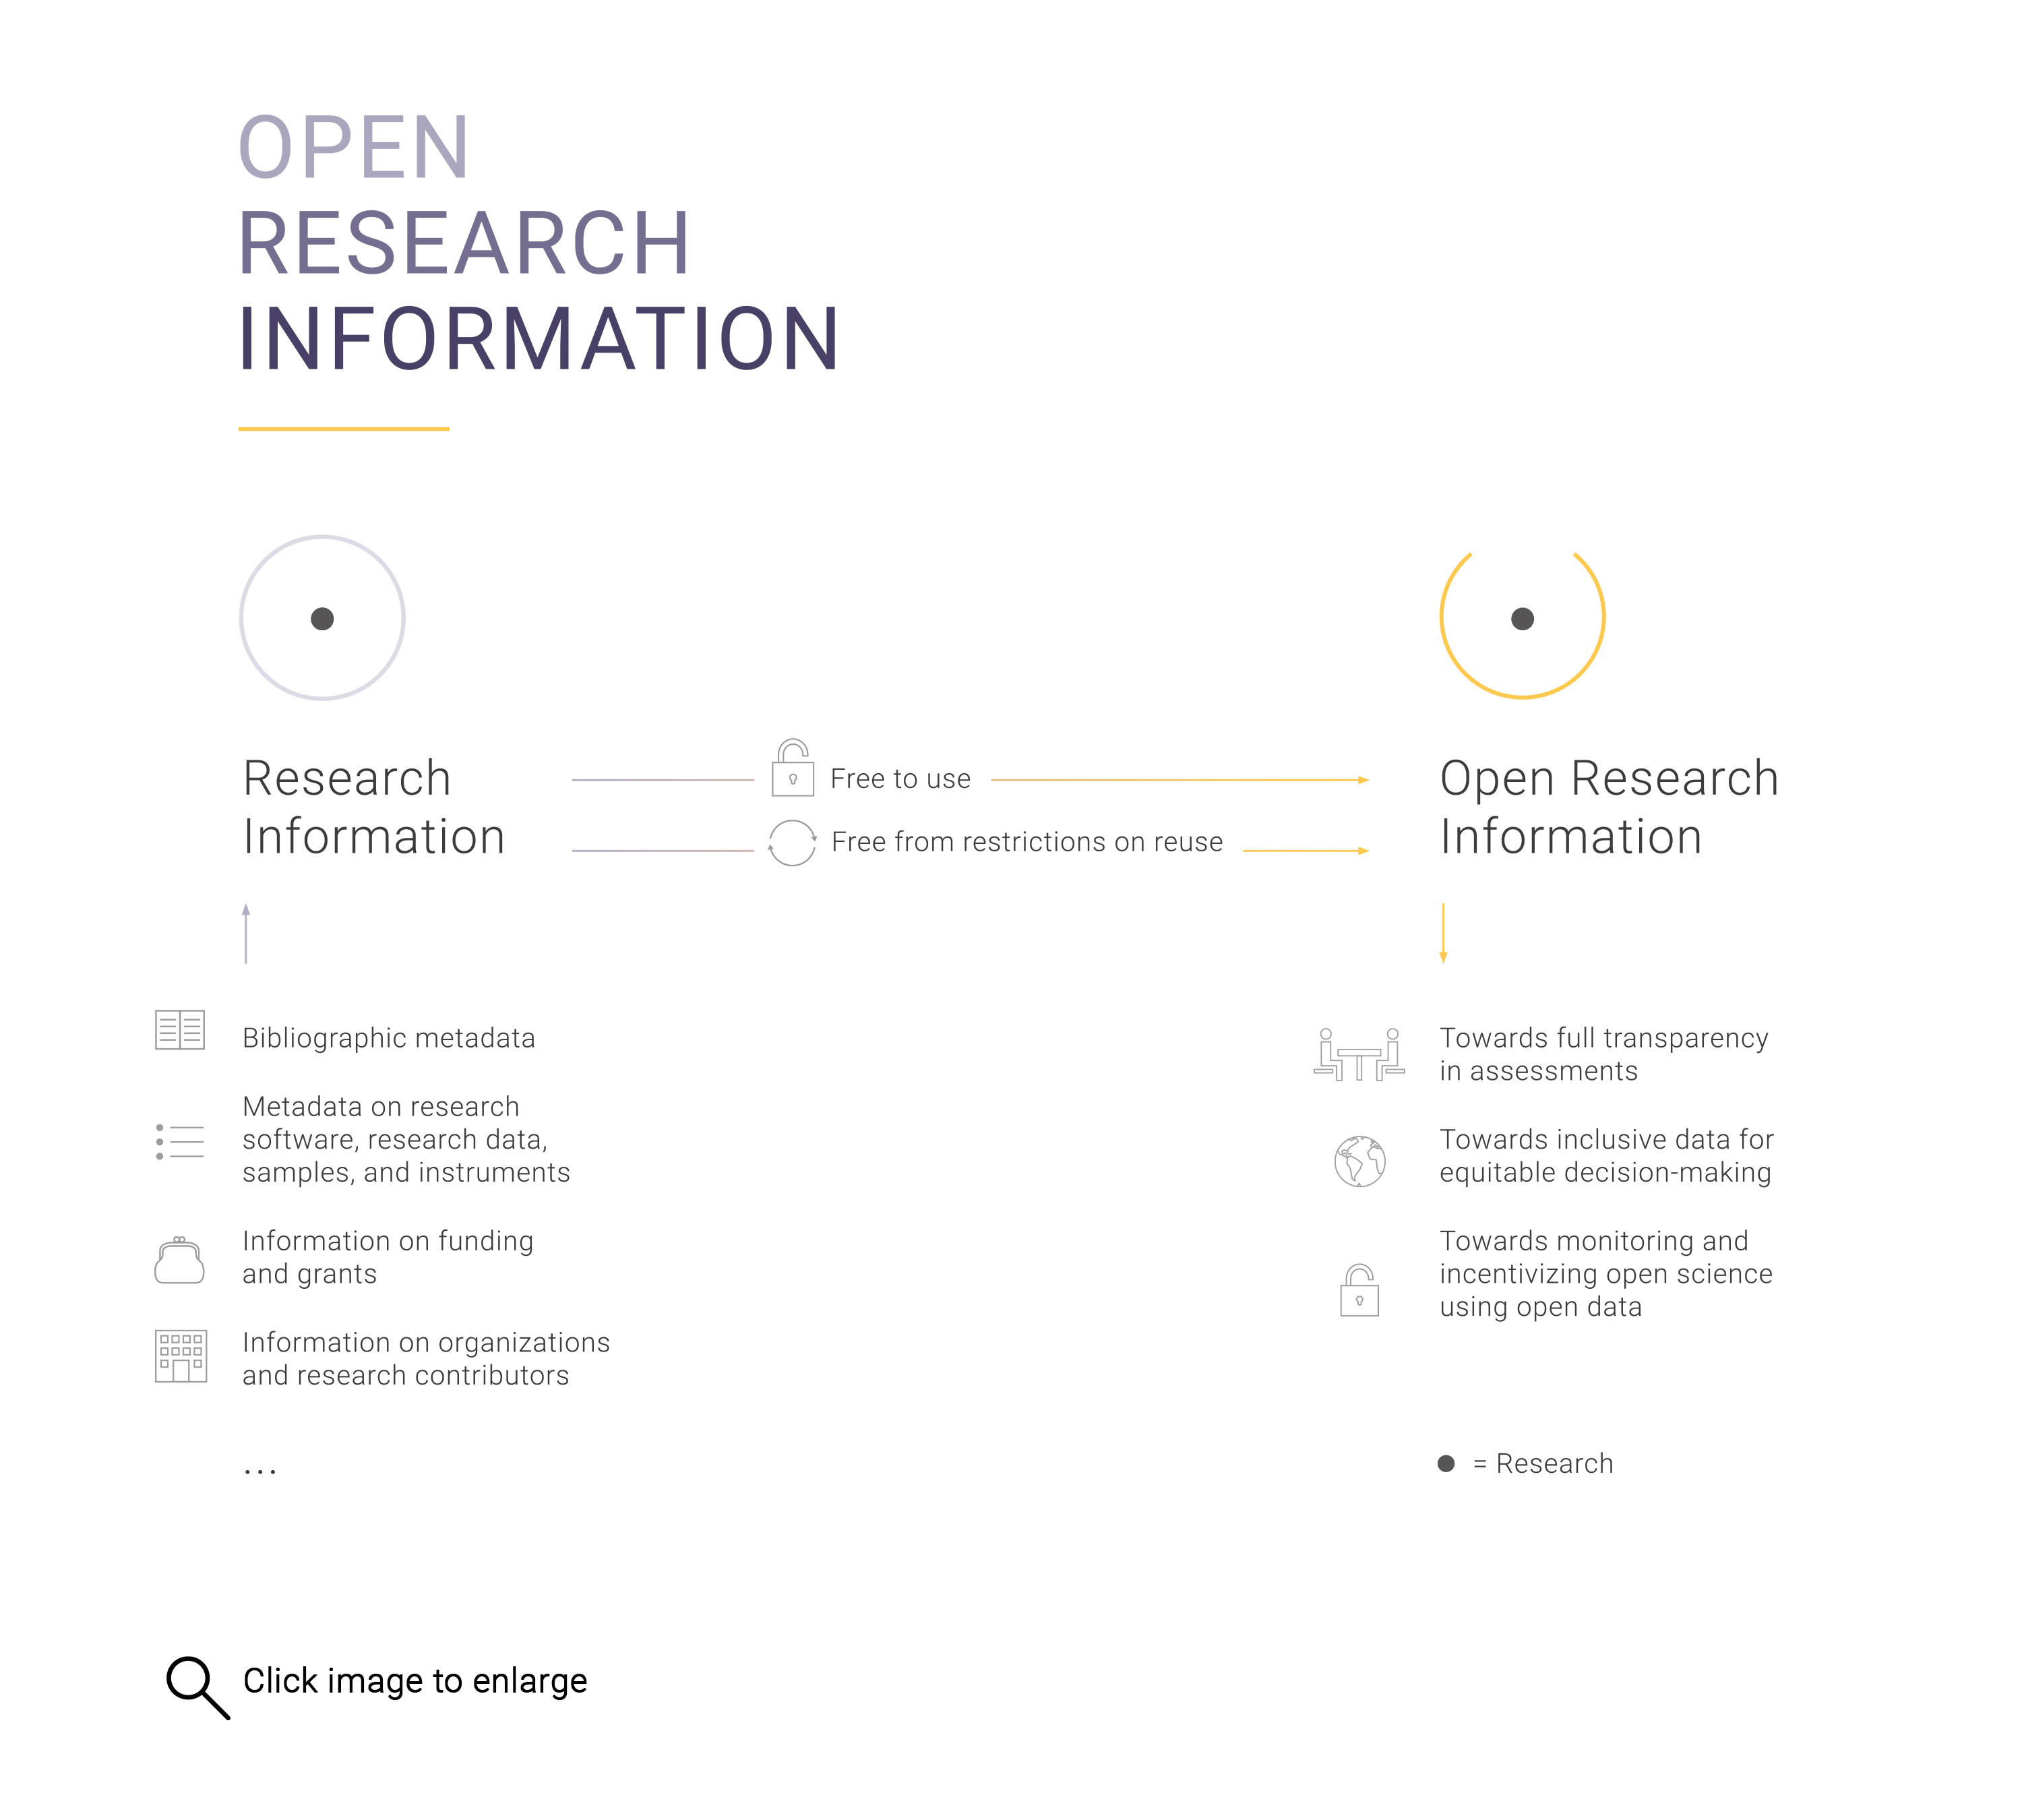 An infographic explaining the scope, characteristics and benefits of open research information. On the left a closed circle represents research information. Two arrows point to the right labelled Free to Use and Free from restrictions on reuse. They point to an open circle labelled Open Research Information. Below, Research Information is explained as including bibliographic metadata, metadata on research, software, research data, samples and instruments, information on funding and grants, and information on research organisations and contributors. Open Research Information is motivated by a desire to move towards full transparency in assessments, towards inclusive data for equitable decision making, and towards monitoring and incentivising open science using open data.